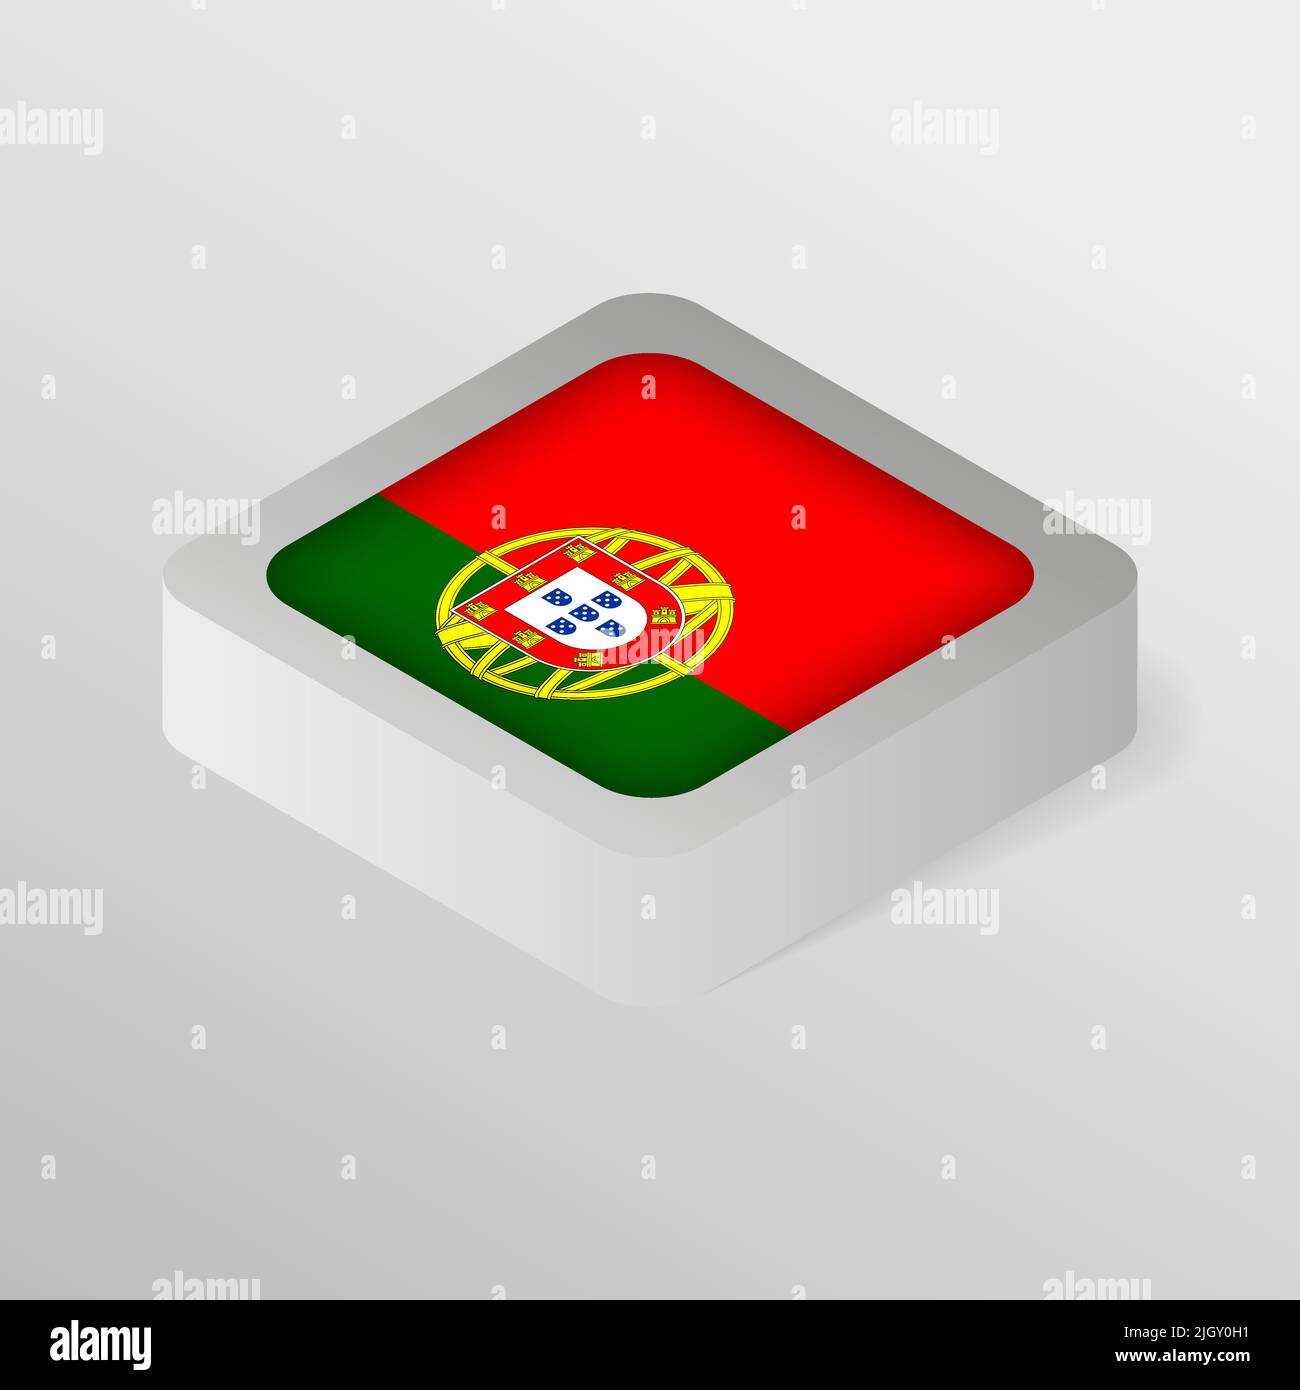 EPS10 Vector Patriotic shield with flag of Portugal. An element of impact for the use you want to make of it. Stock Vector